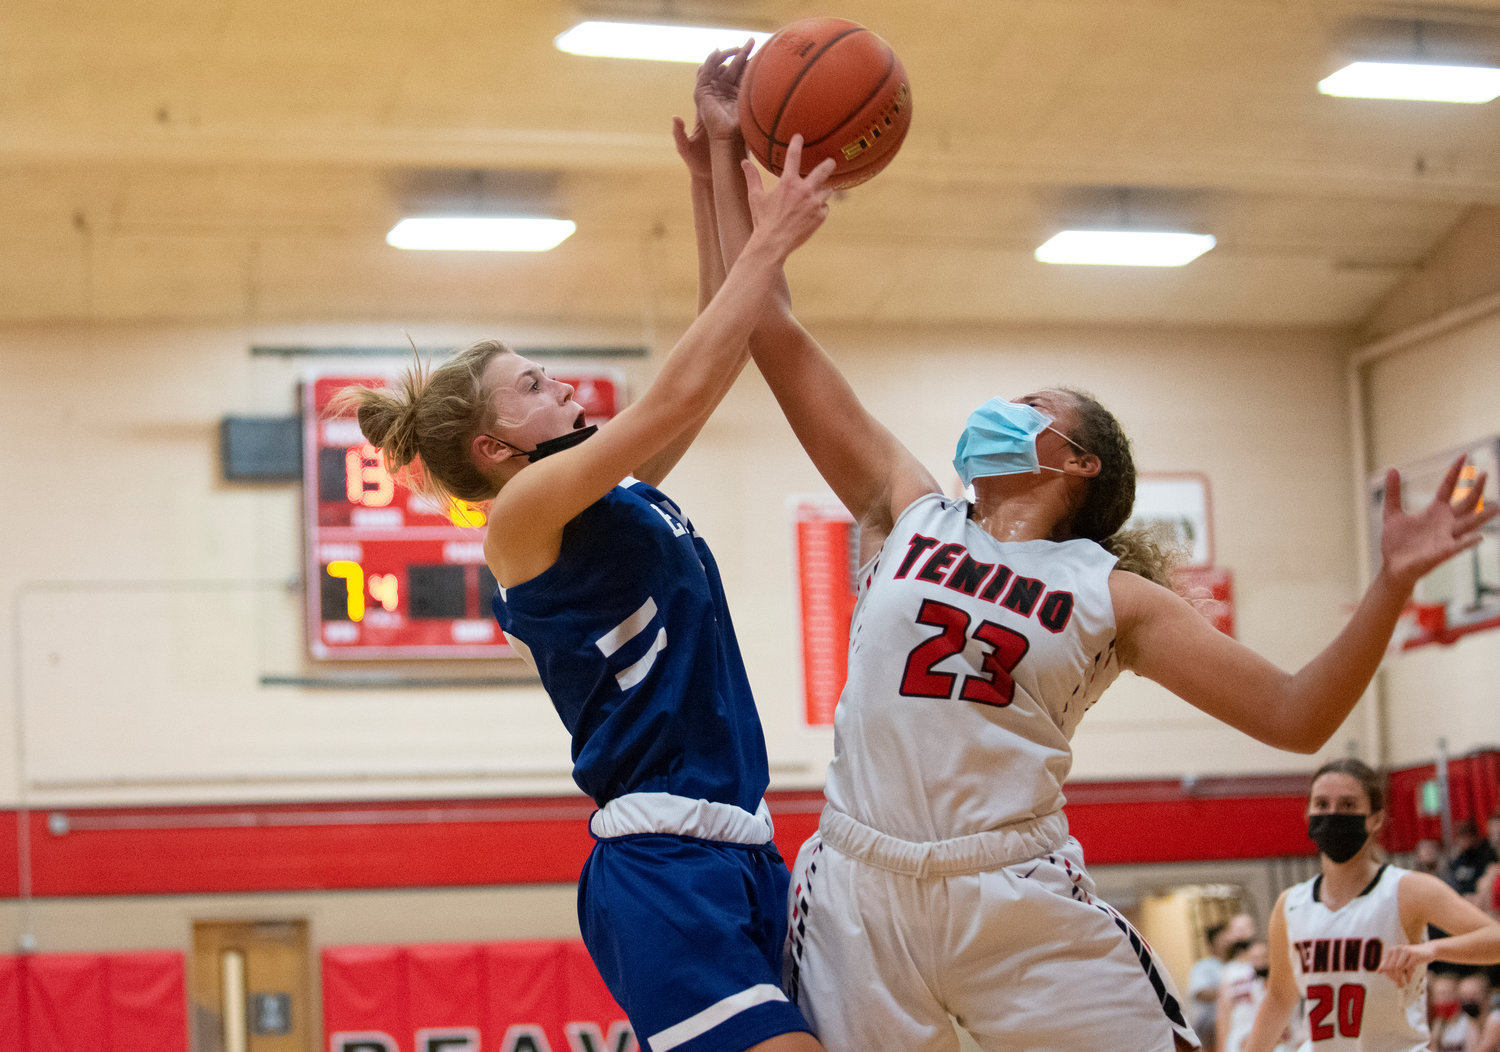 Tenino's Alivia Hunter (23) battles with an Elma player for a rebounds on Saturday.